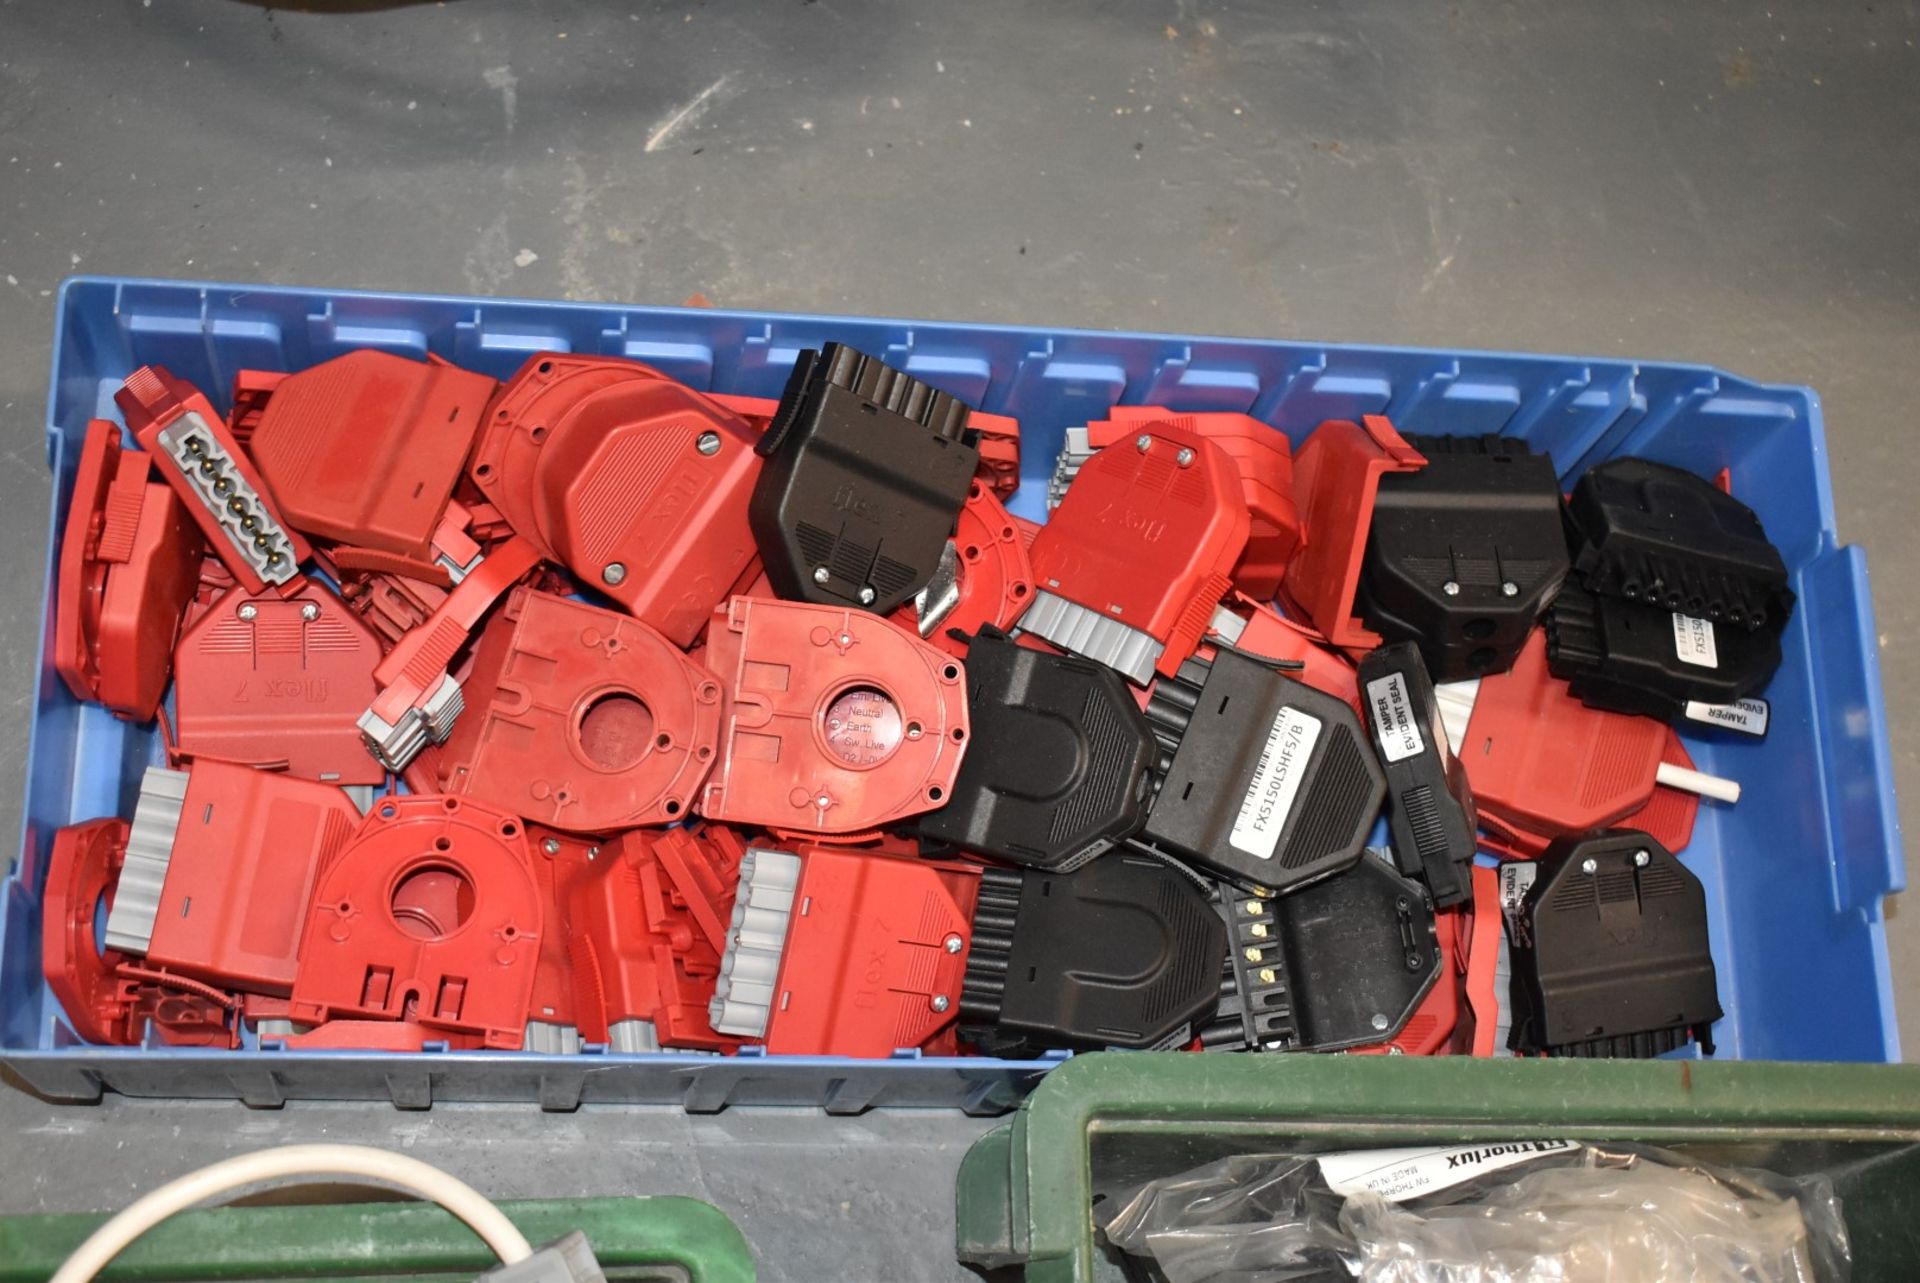 1 x Job Lot Of Assorted Electrical Components - Ref: C654 - CL816 - Location: Birmingham, B45 - Image 5 of 19